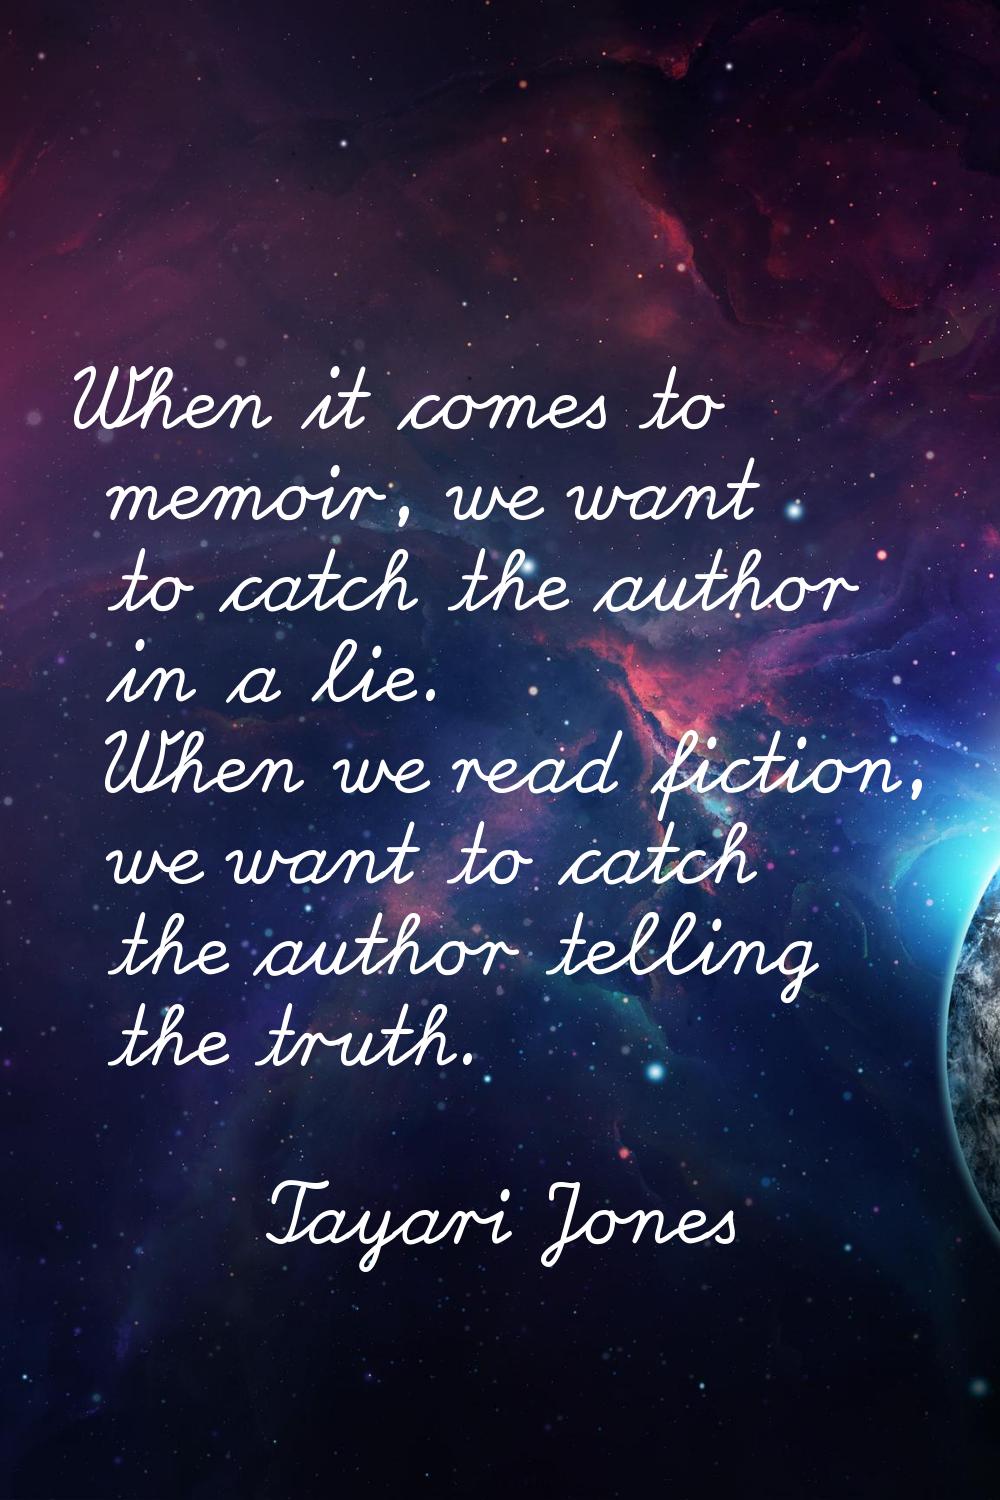 When it comes to memoir, we want to catch the author in a lie. When we read fiction, we want to cat